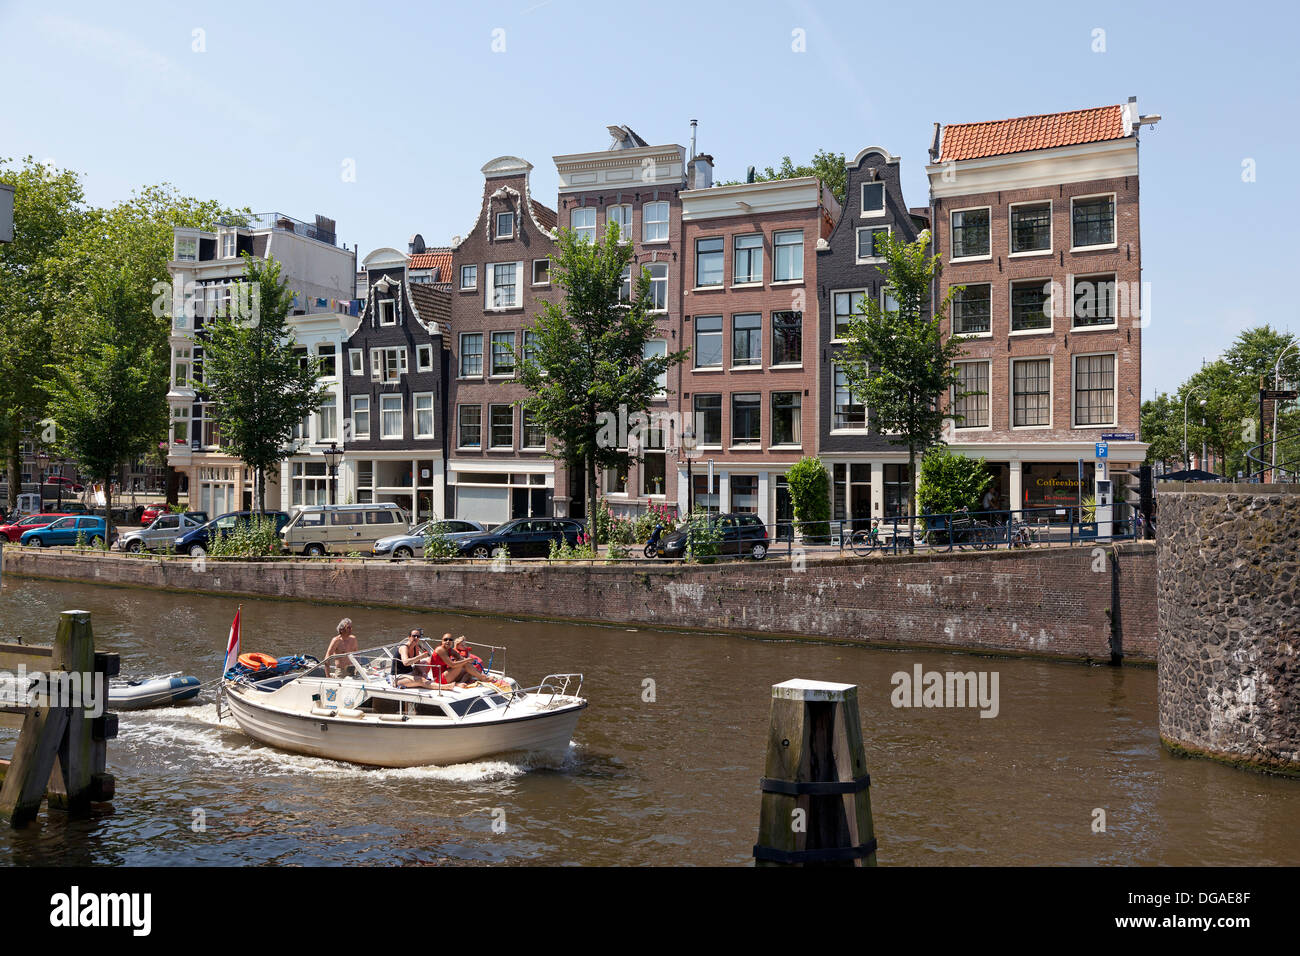 Boattrip in Amsterdam through the canals Stock Photo